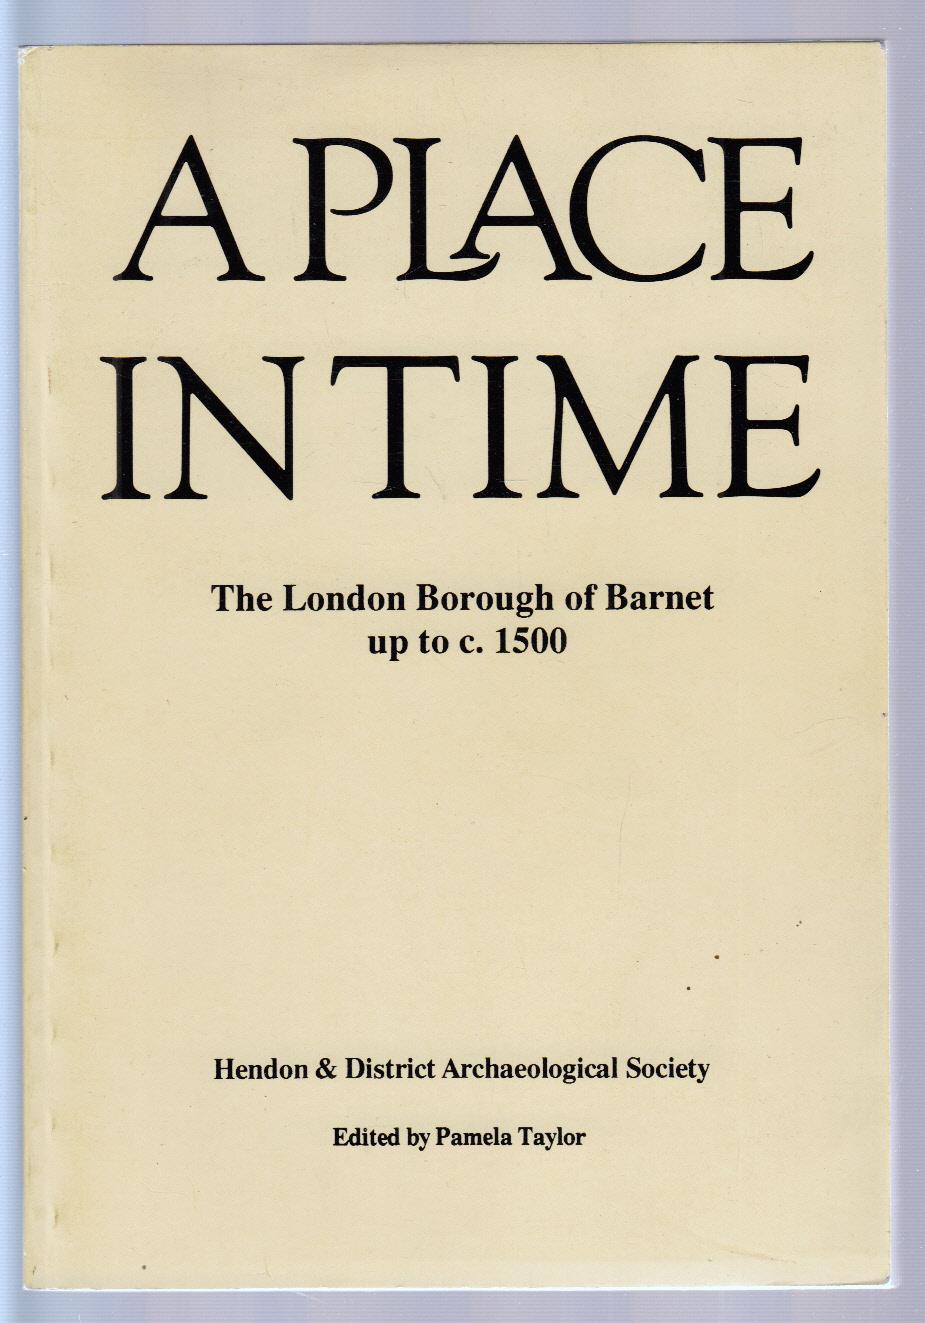 Place in Time: London Borough of Barnet Up to c.1500 - P J Taylor